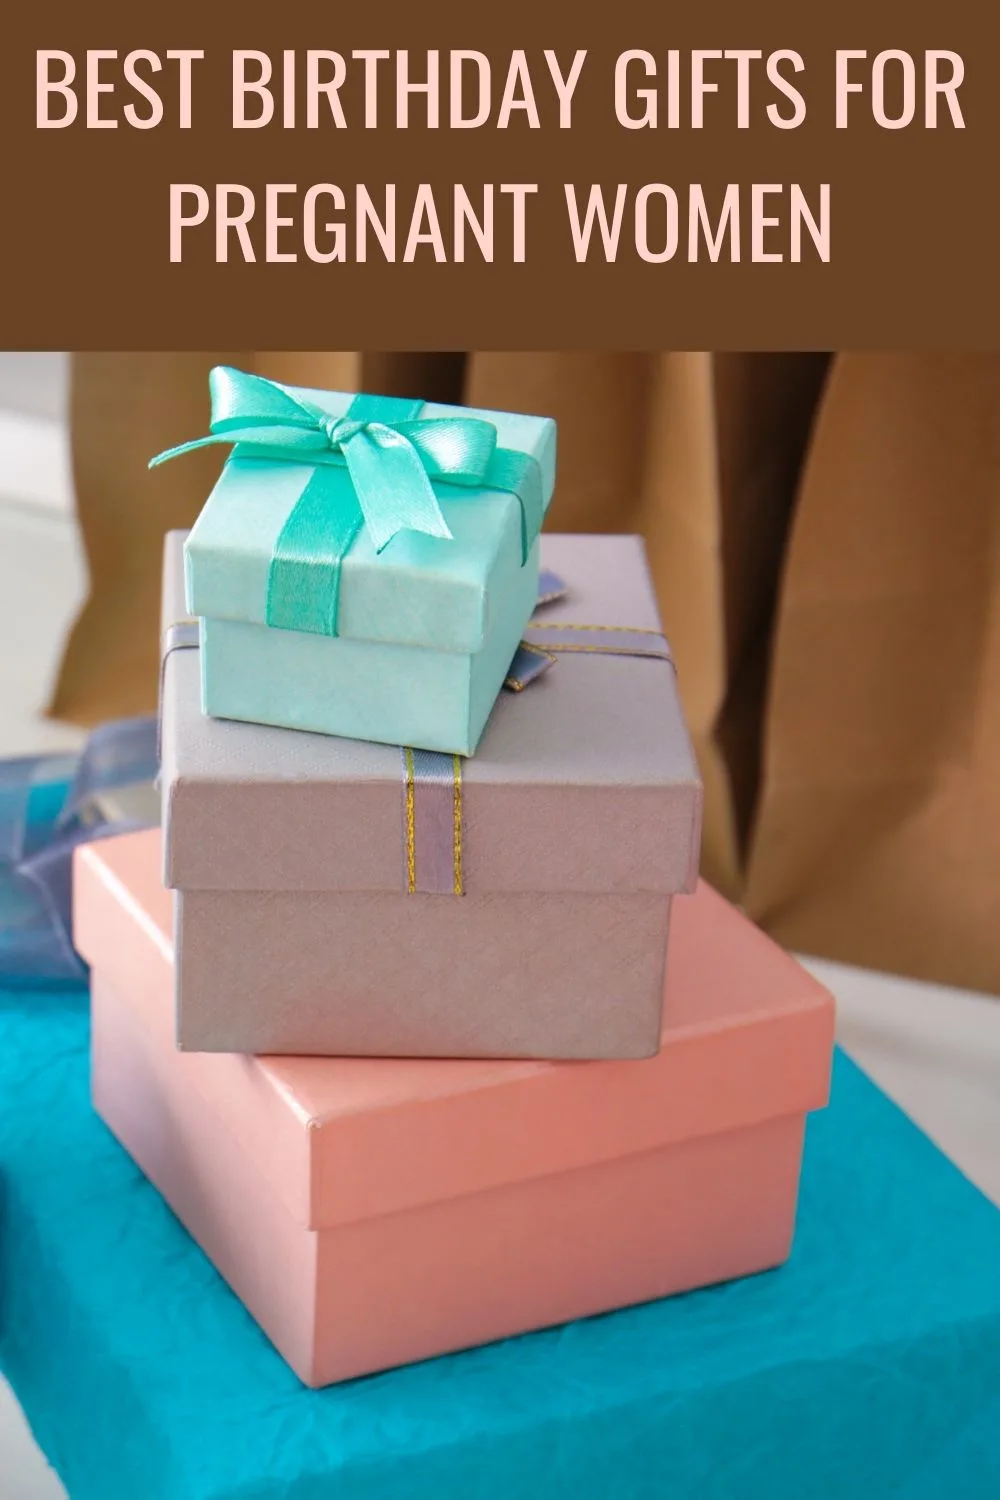 Best birthday gifts for pregnant women